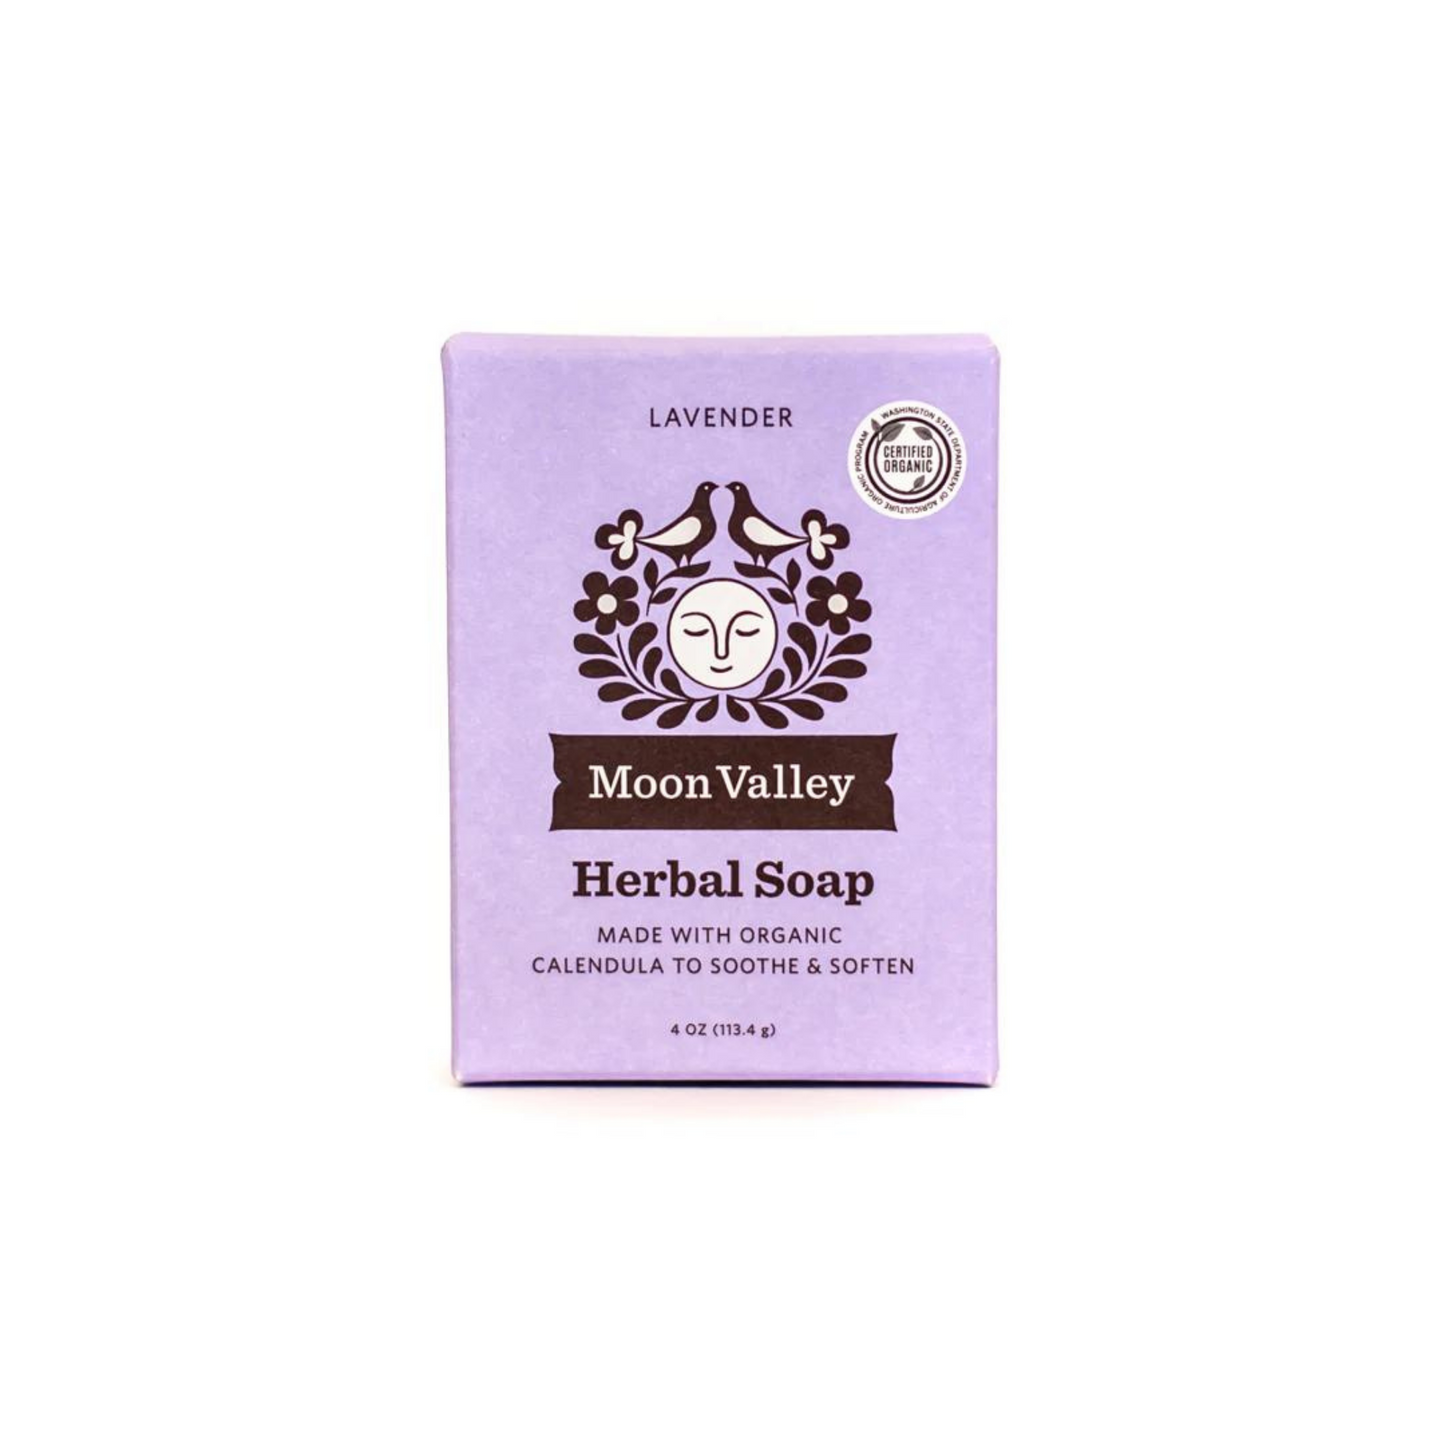 Primary Image of Lavender Herbal Soap